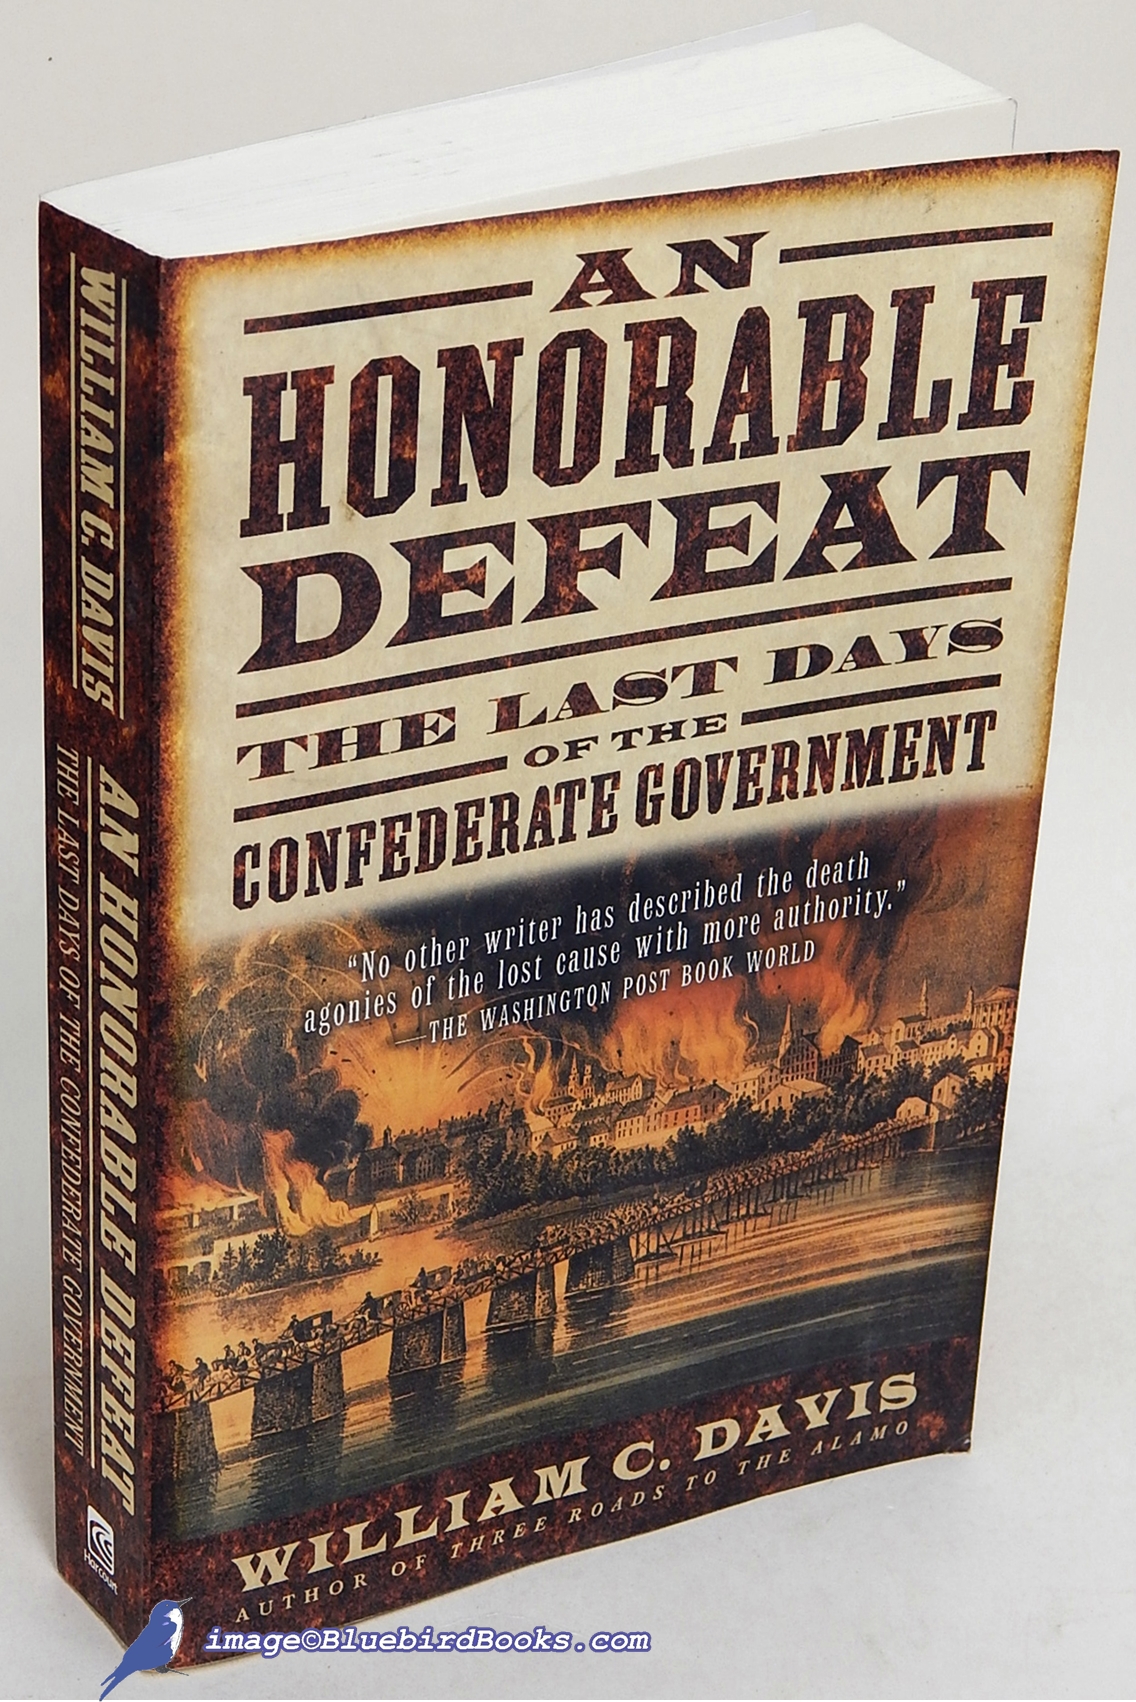 DAVIS, WILLIAM C. - An Honorable Defeat: The Last Days of the Confederate Government